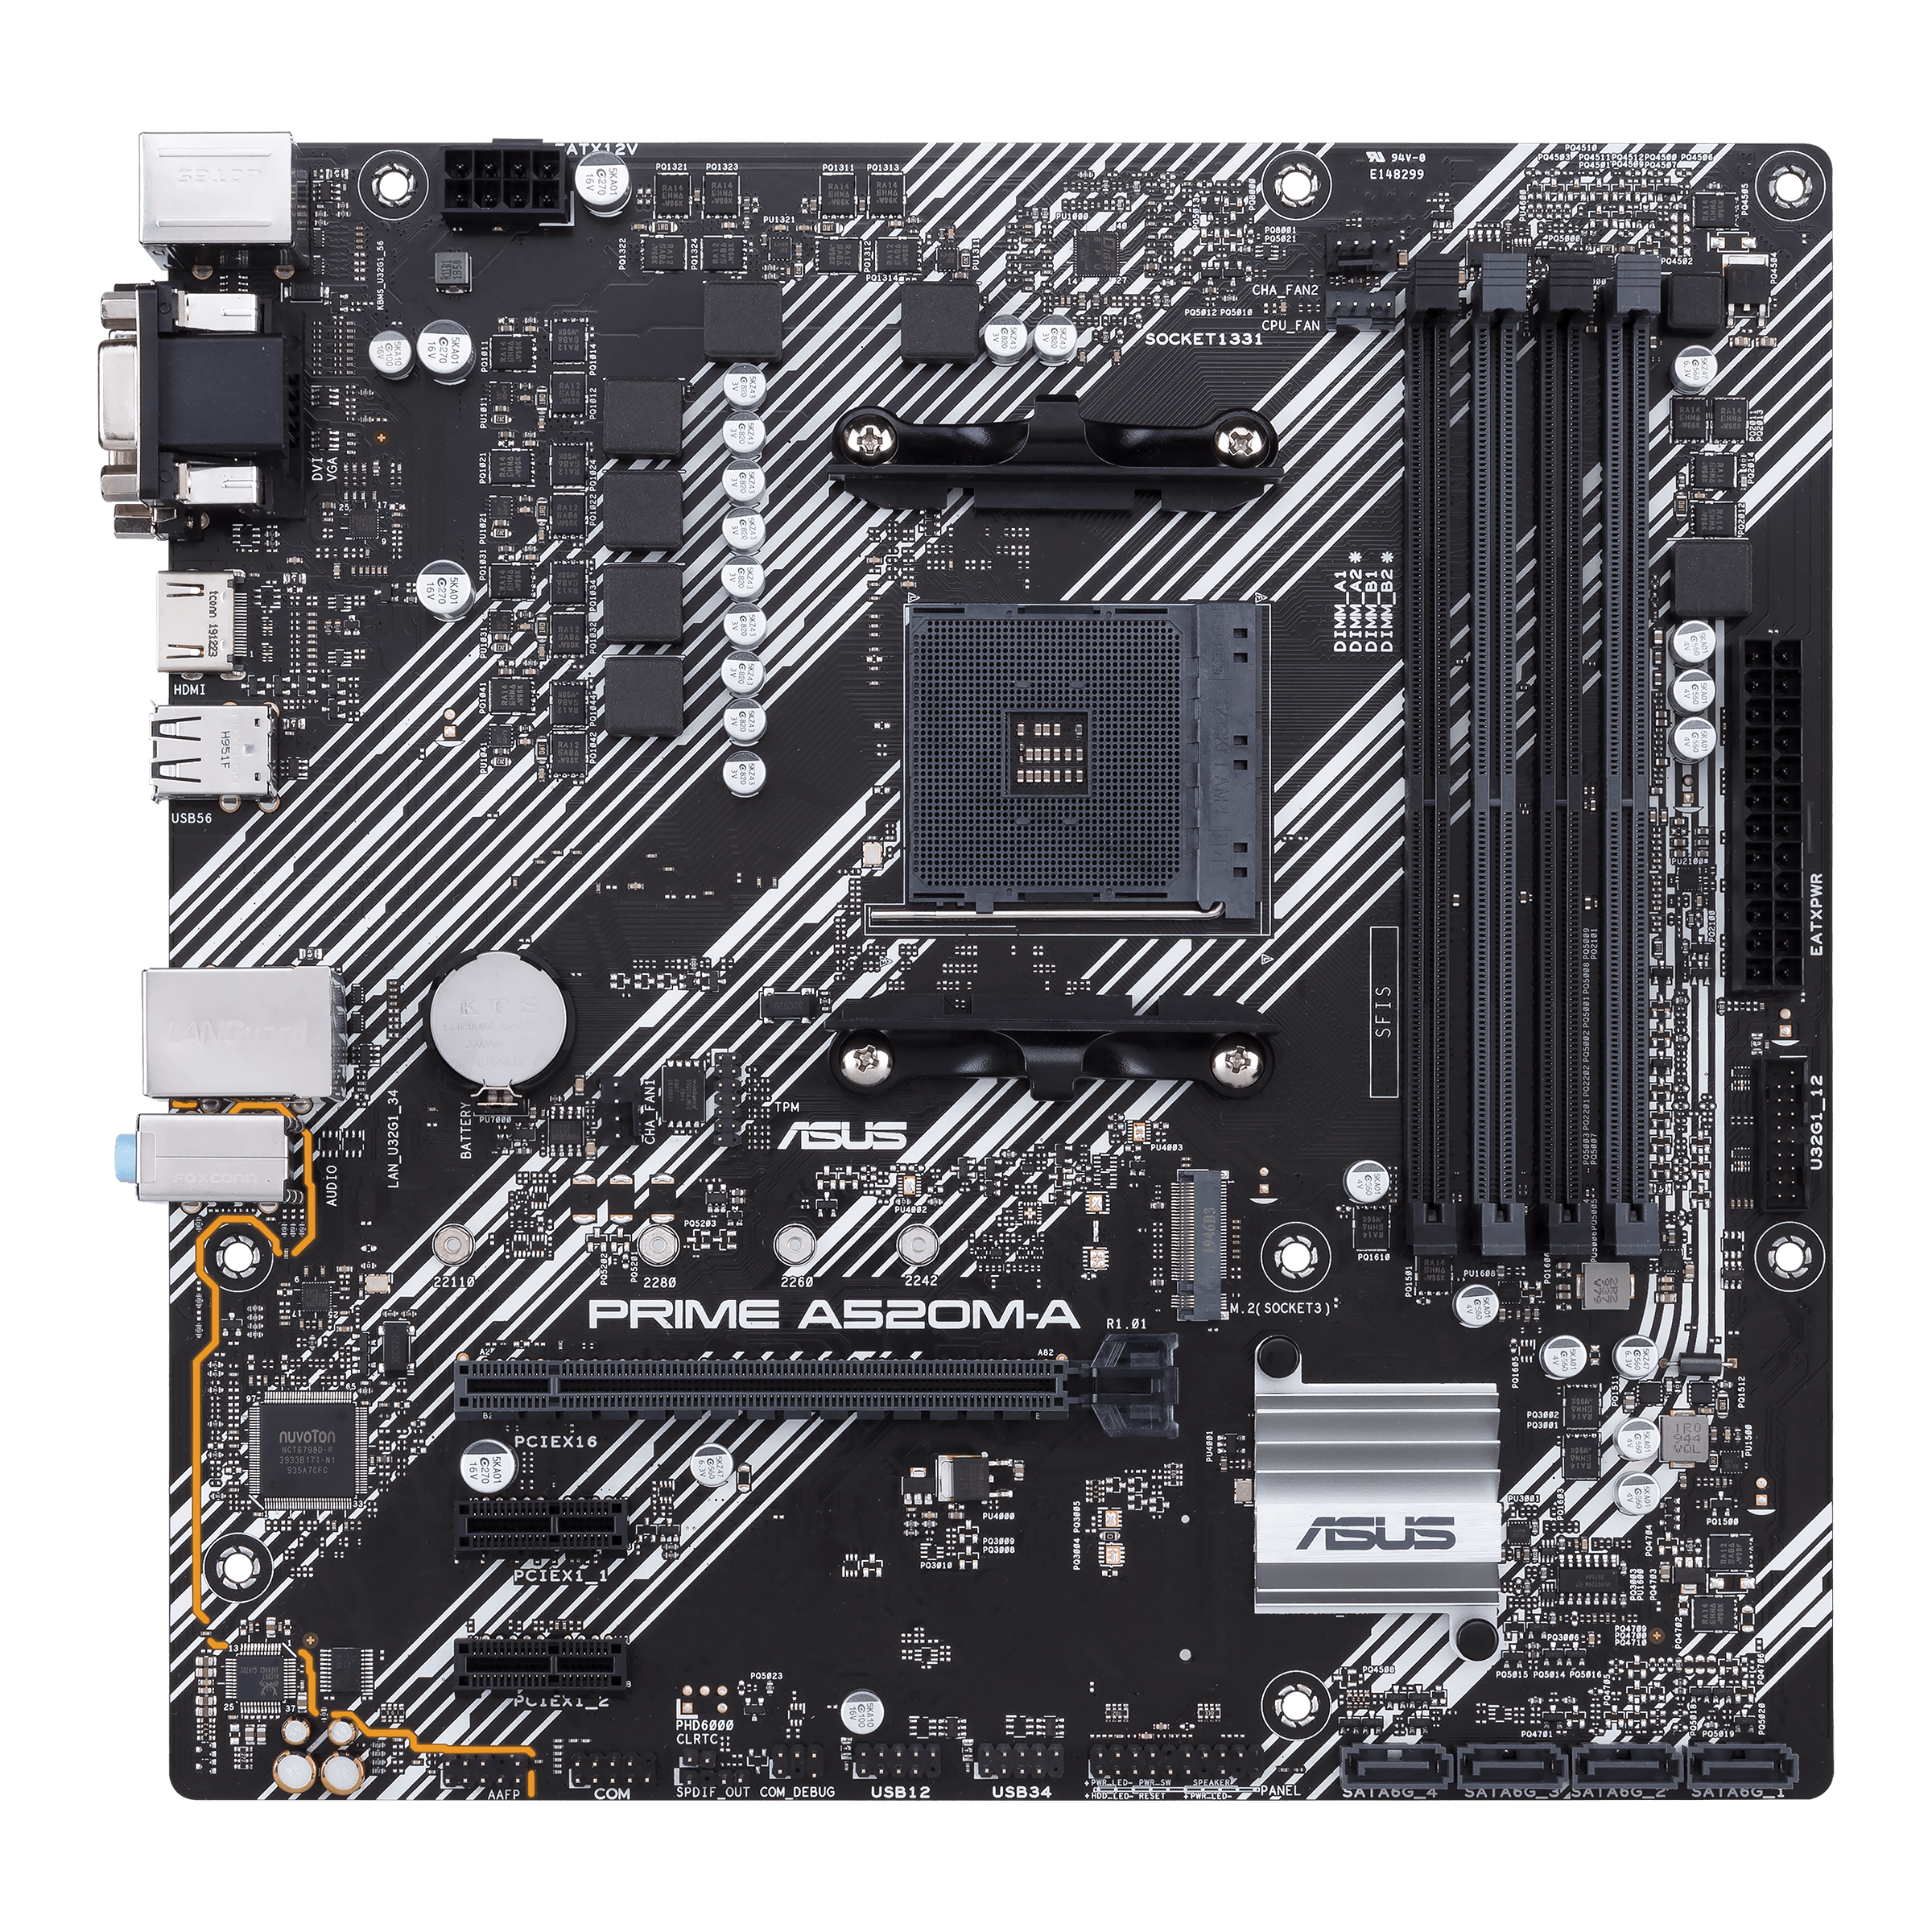 PRIME A520M-A｜Motherboards｜ASUS Global